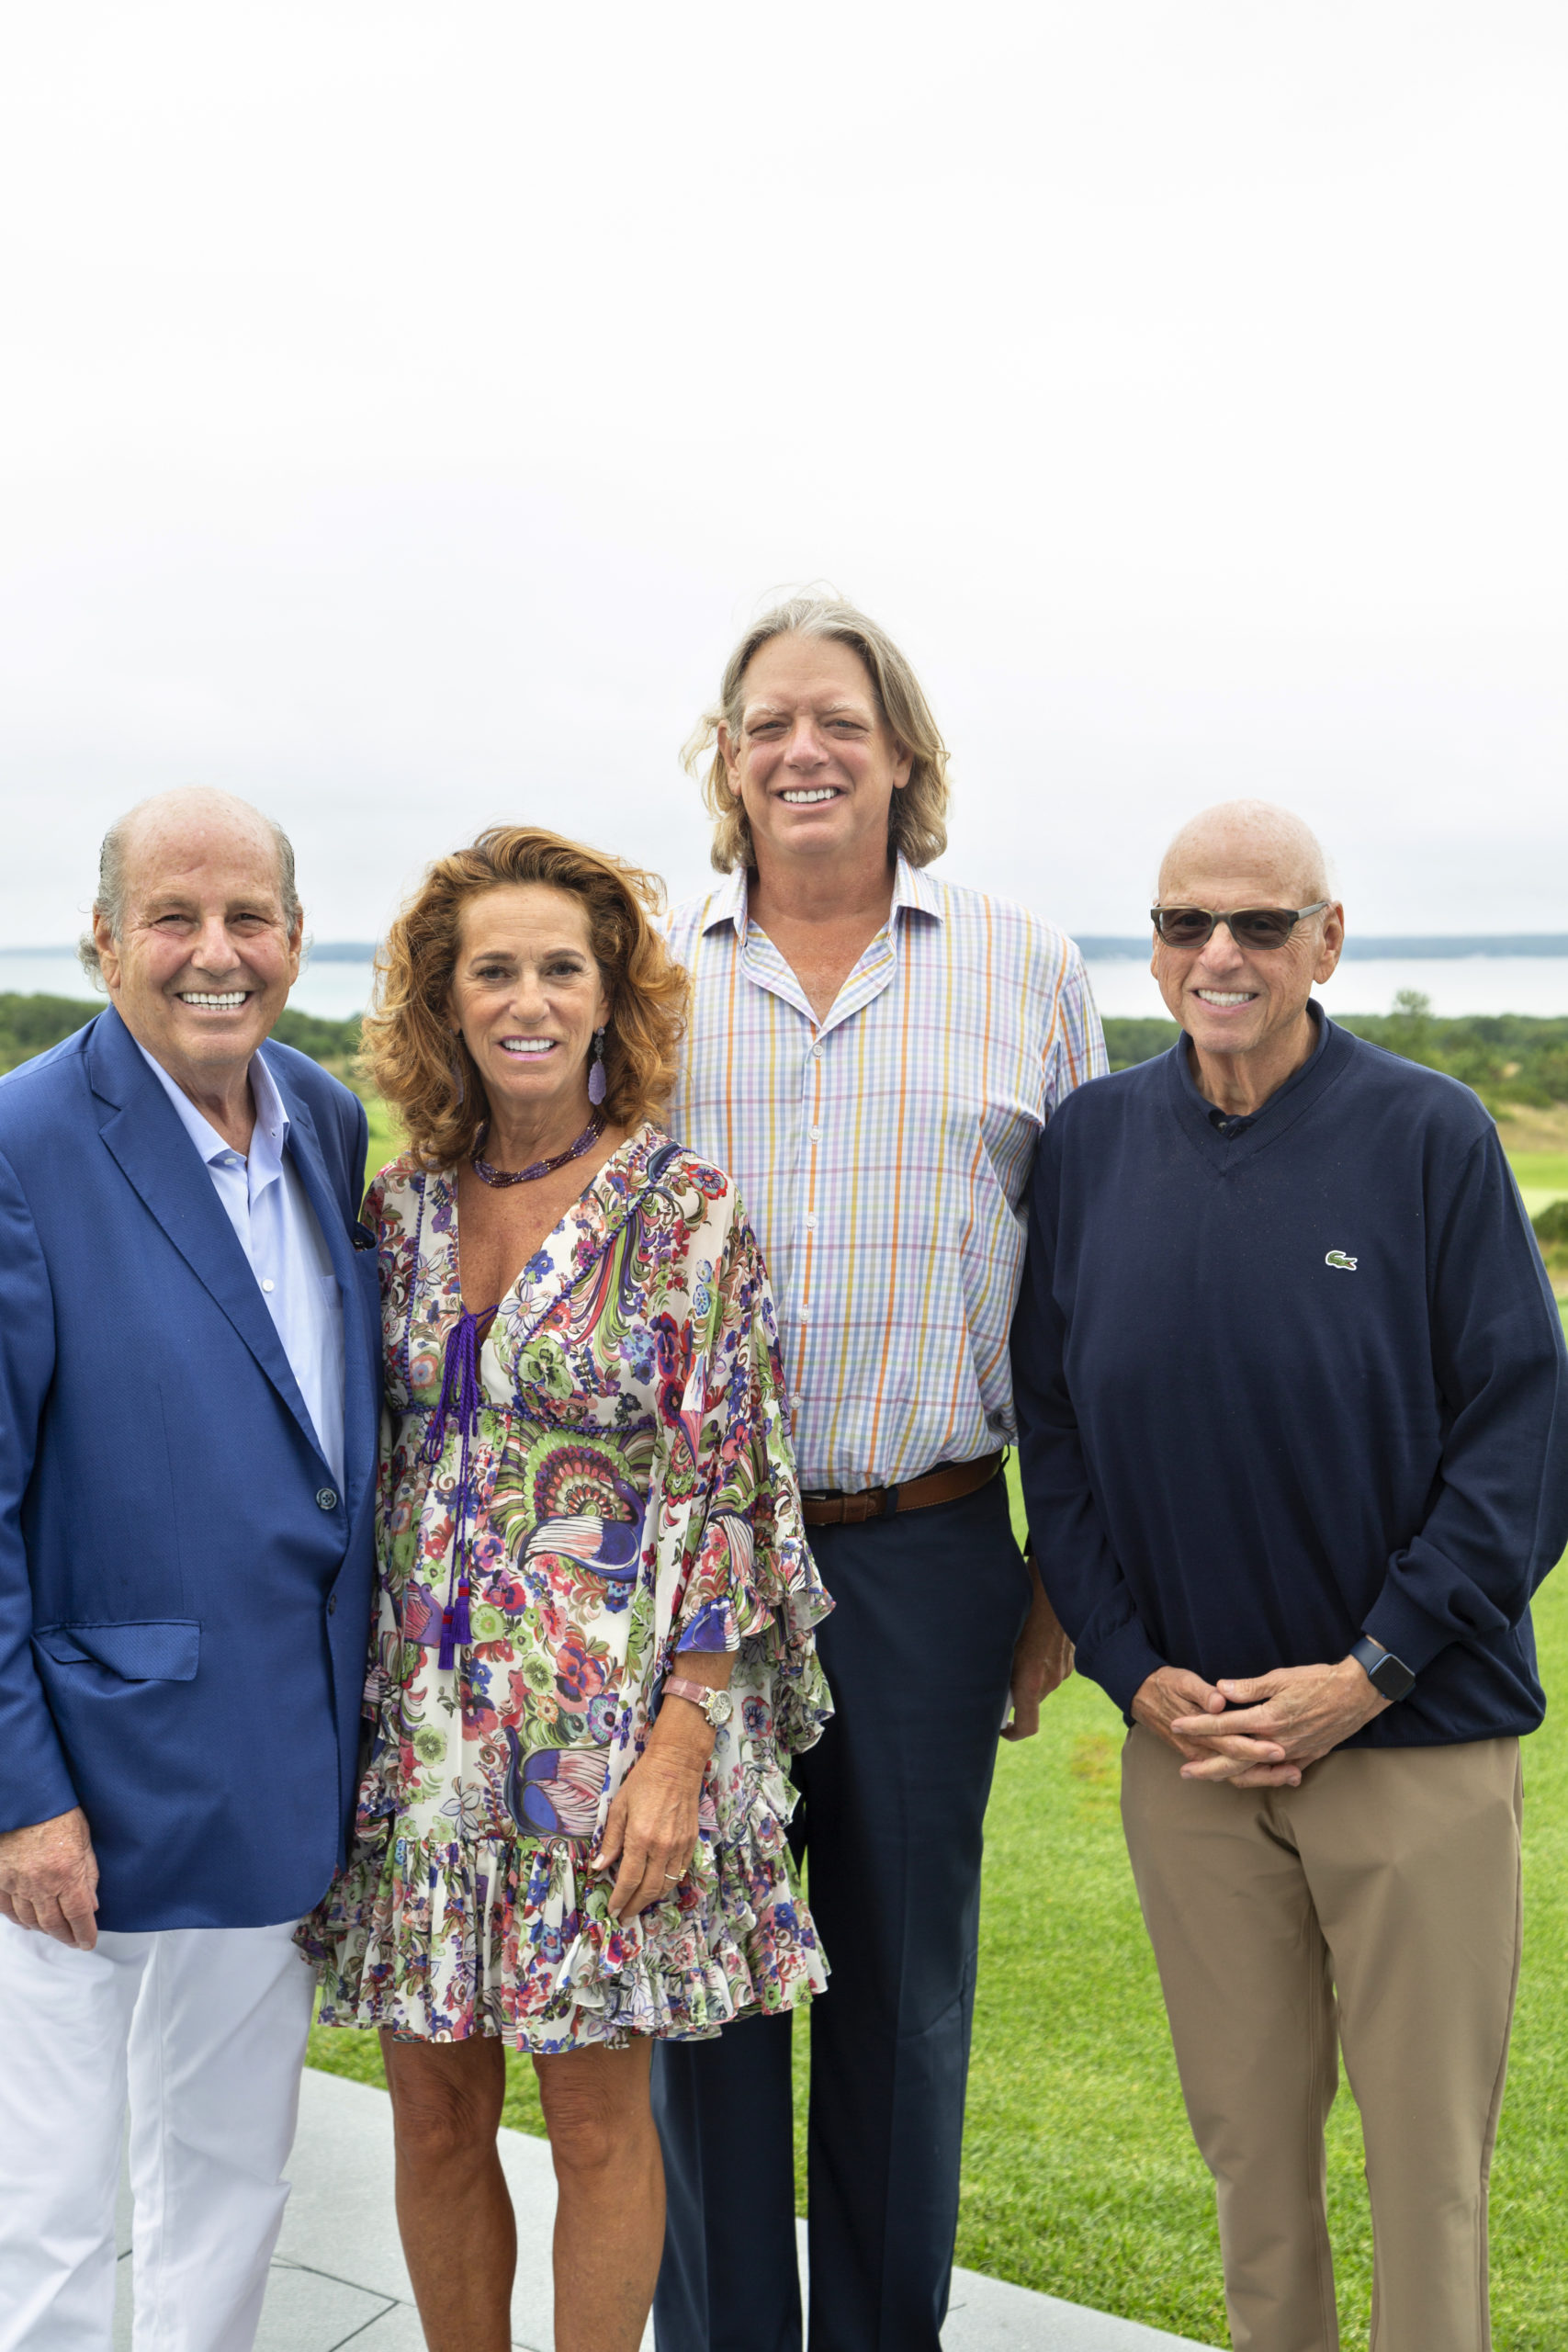 Jeffrey Feil, Debbrah Lee Charatan, Lloyd Goldmaan and Howard Lorber at the U.S. Holocaust Memorial Museum New YOrk Real Estate Event at The Bridge in Bridgehampton on August 5. The event raised funds in support of the museum’s mission to preserve the evidence and memory of the Holocaust.